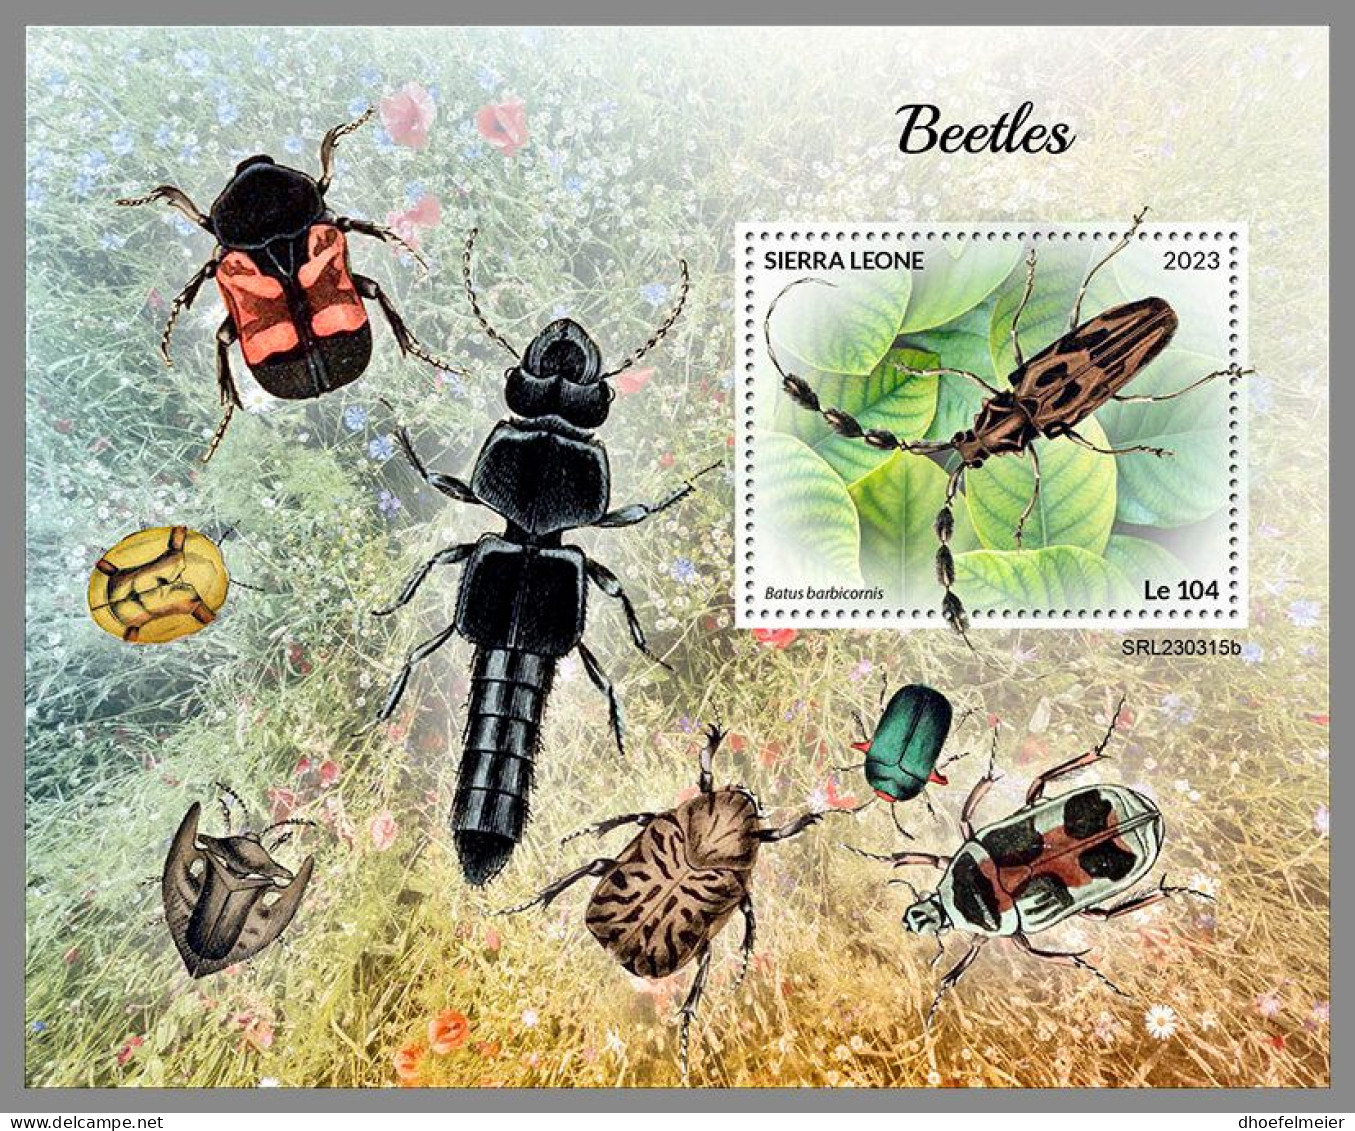 SIERRA LEONE 2023 MNH Beetles Käfer S/S – OFFICIAL ISSUE – DHQ2418 - Coleotteri